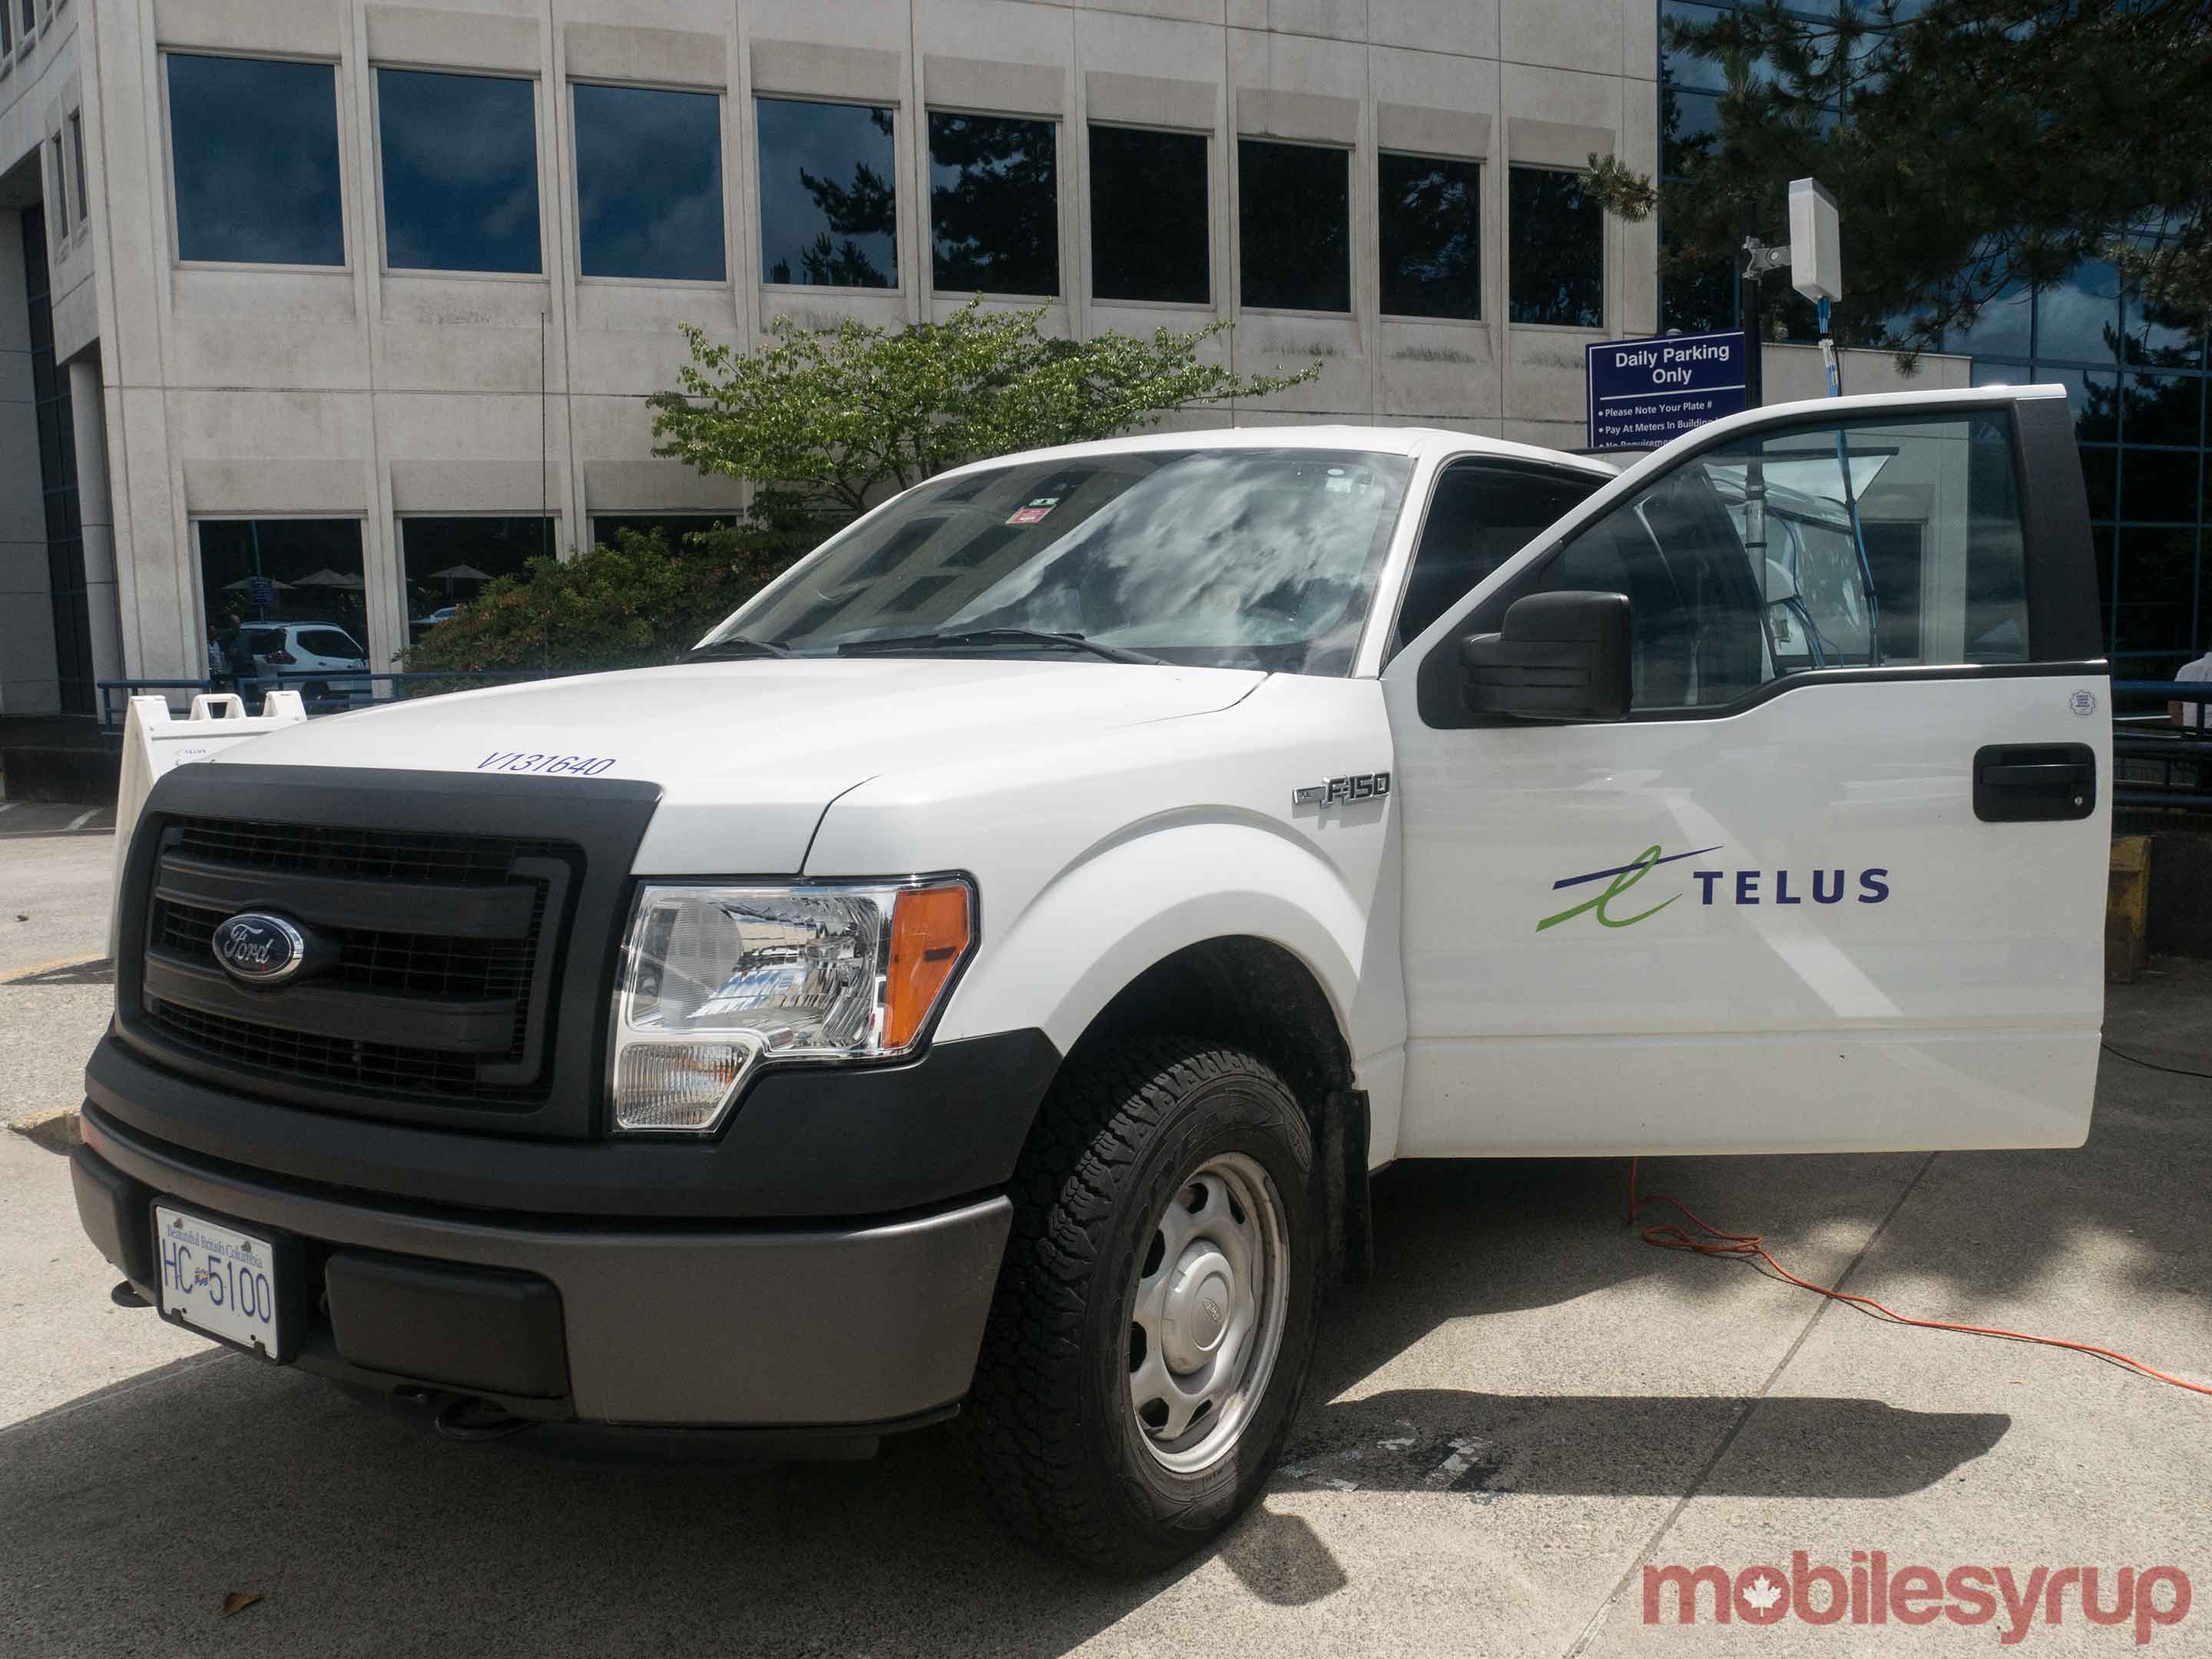 Telus truck at Huawei 5G event